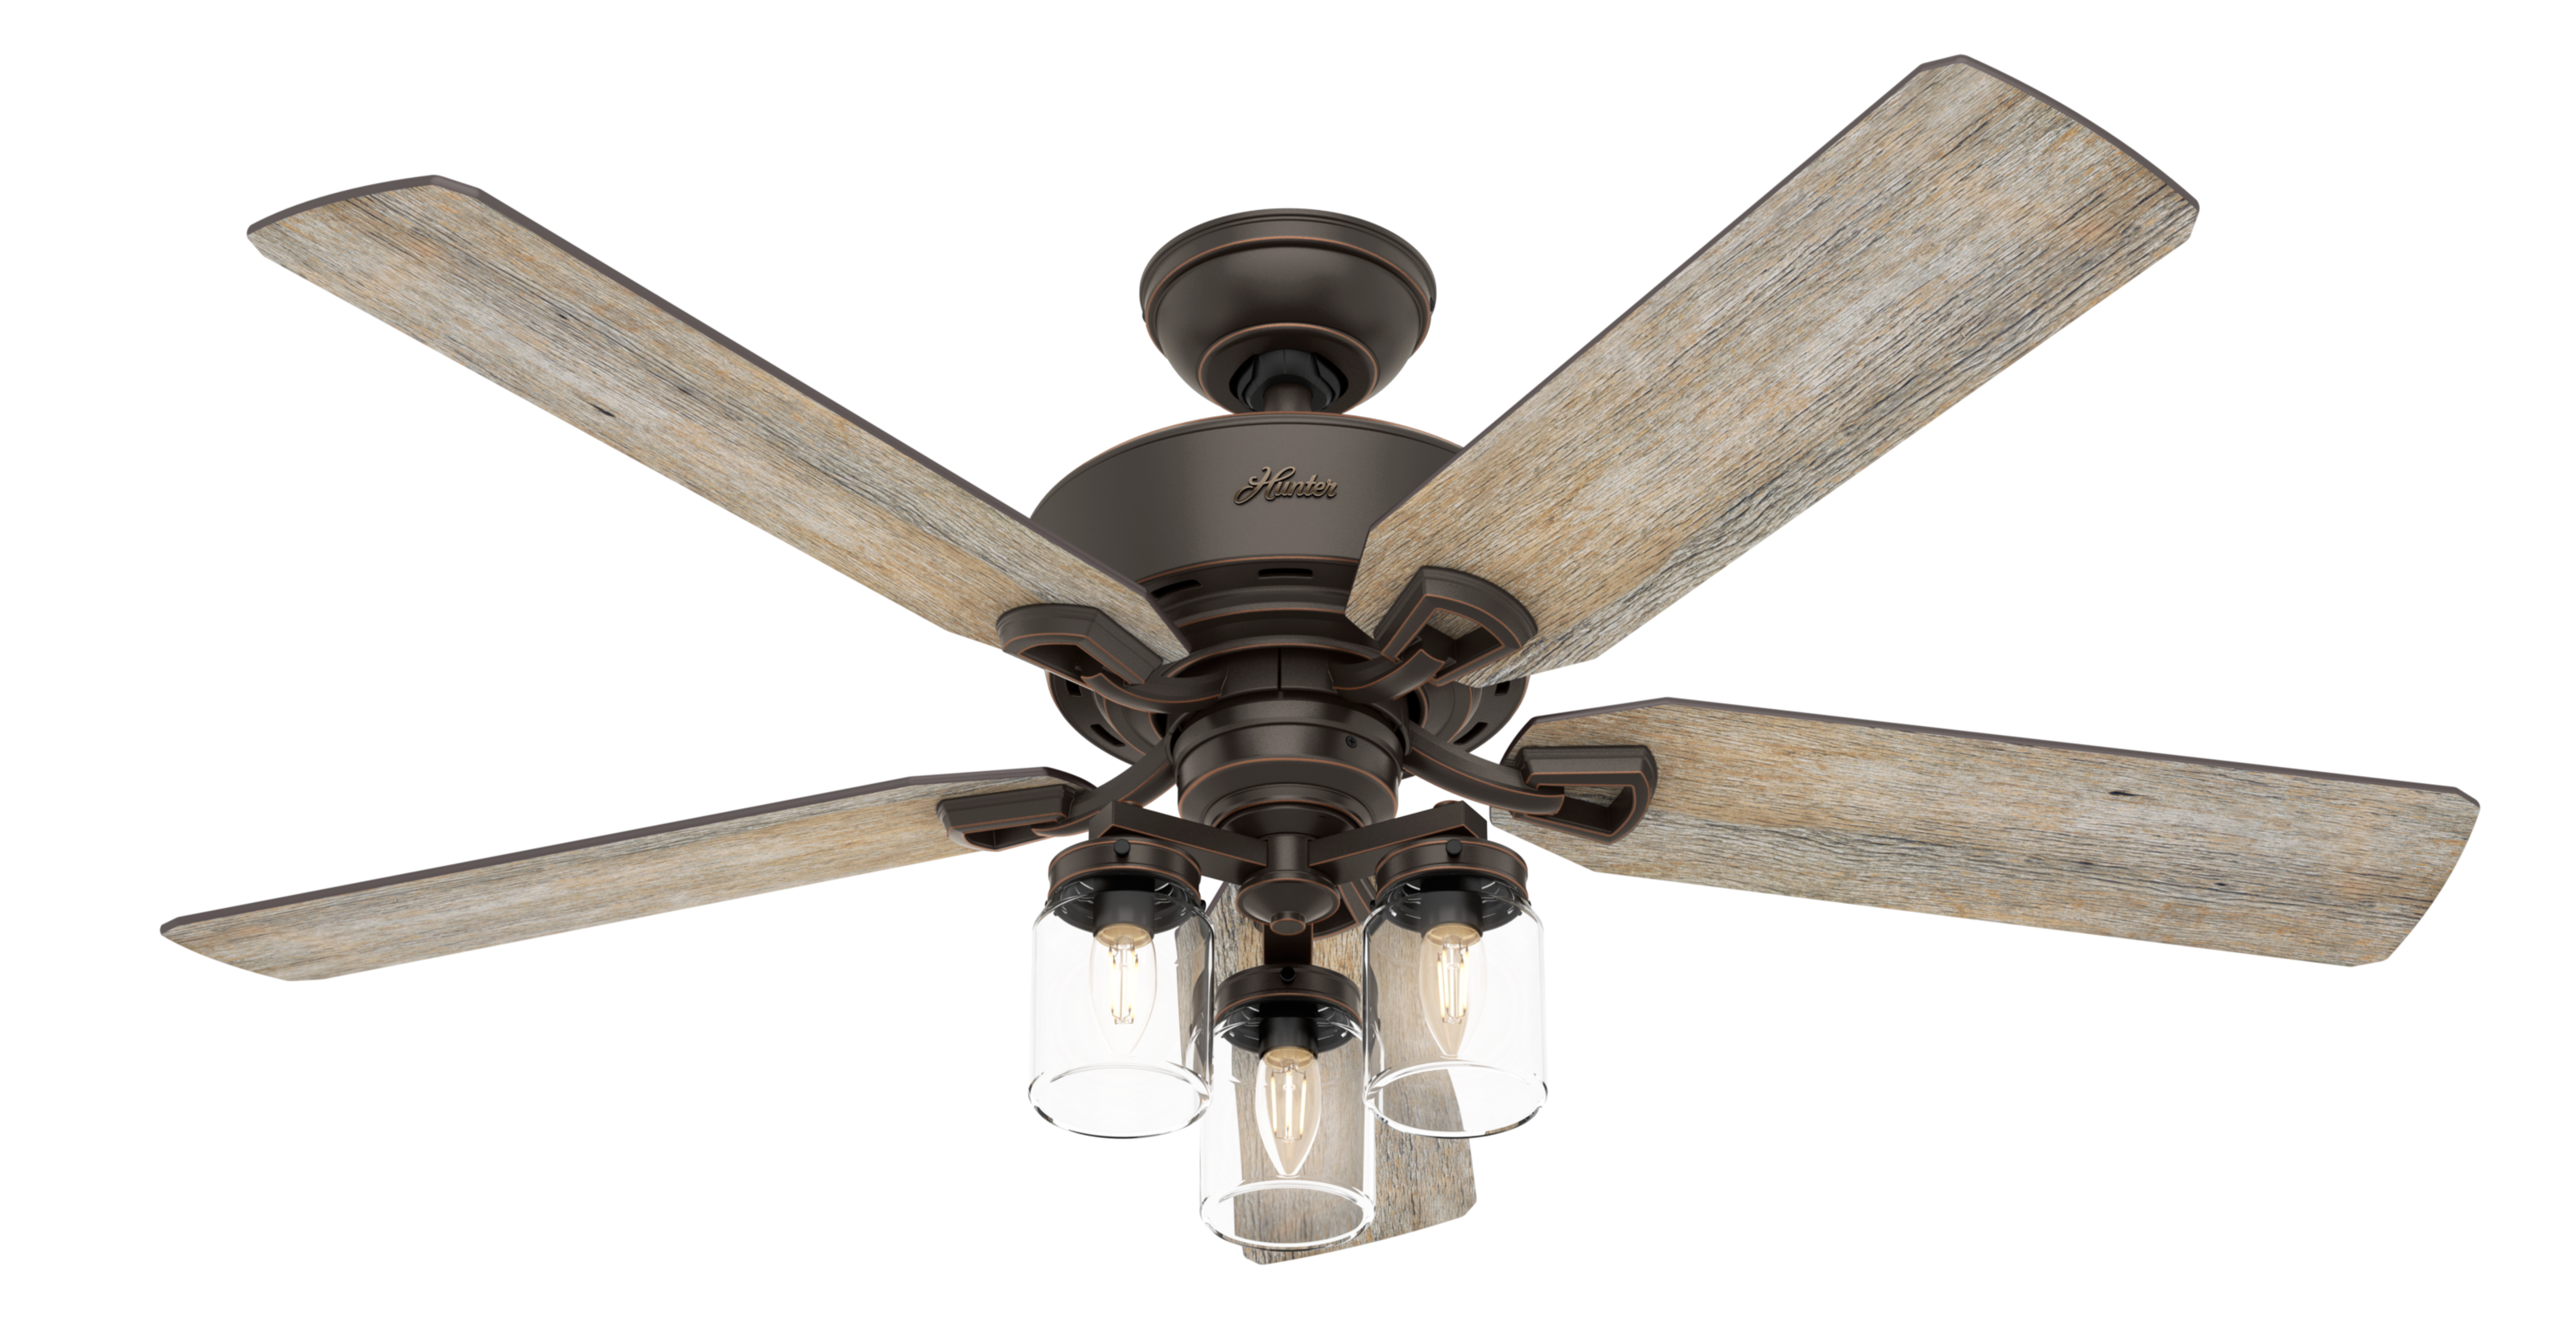 Hunter 52 inch Devon Park Ceiling Fan with LED Light Kit and Handheld Remote